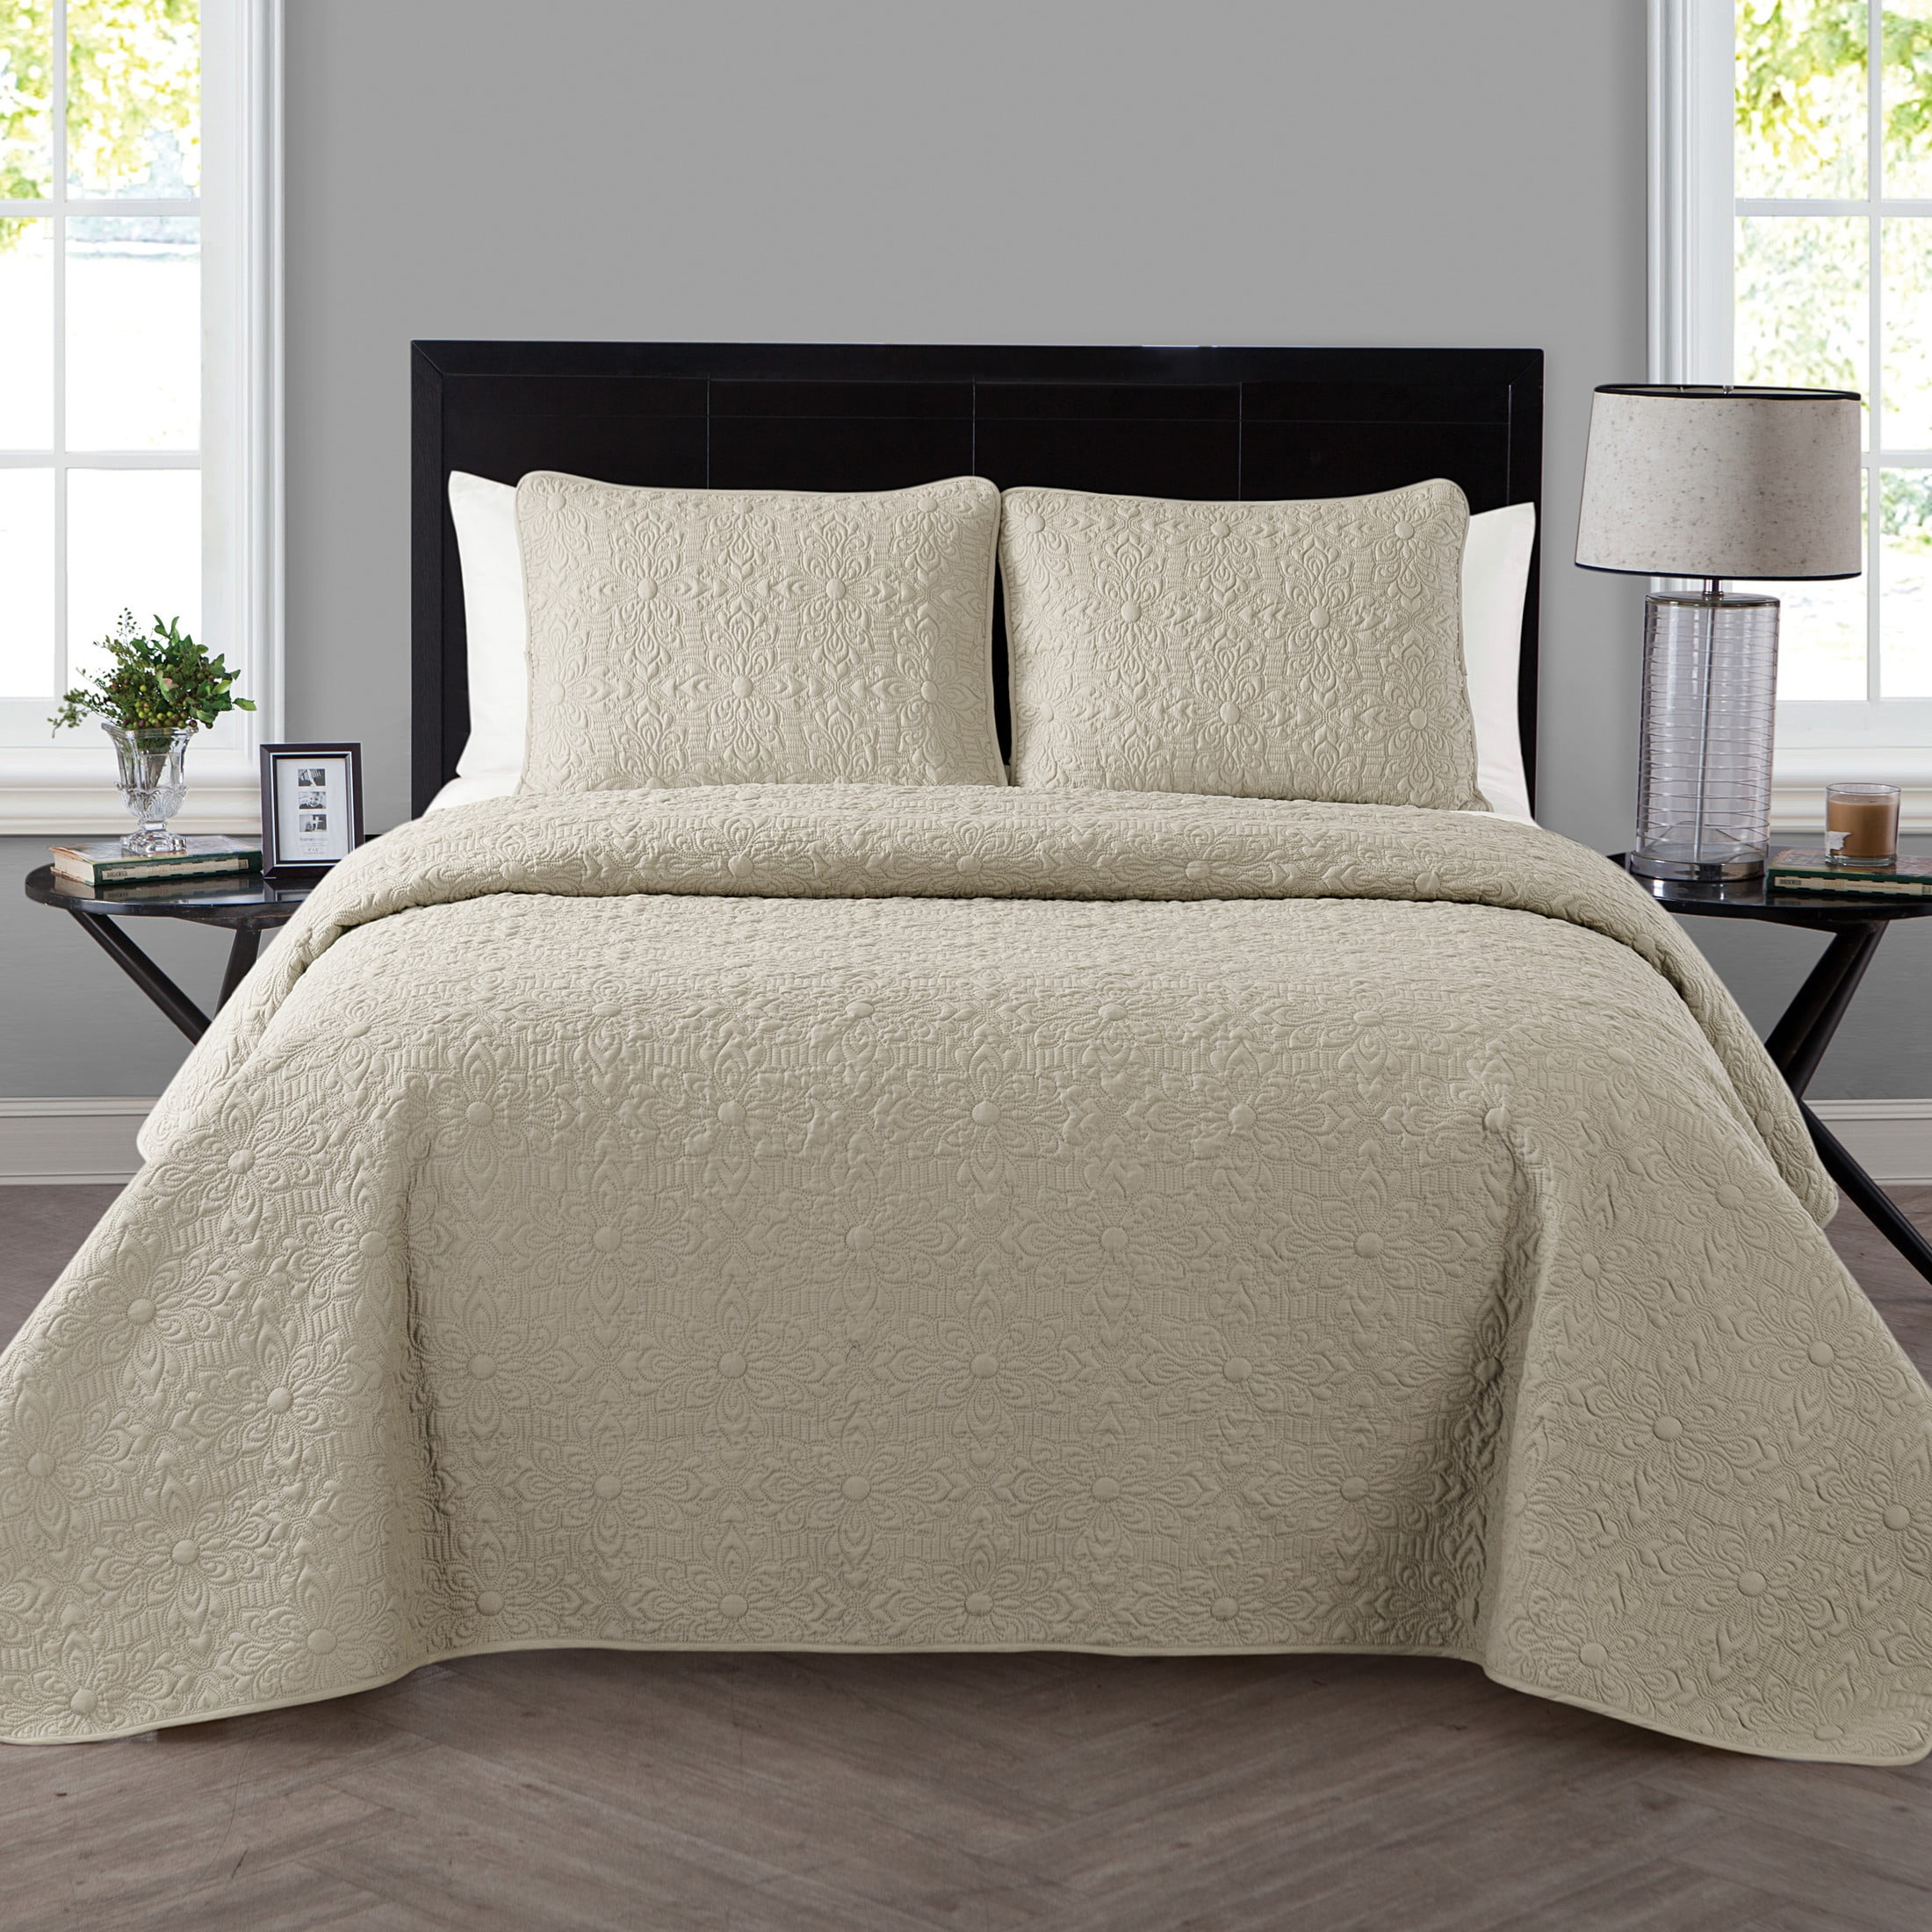 Details about   Better Home Style 3 Piece Luxury Ultrasonic Embossed Solid Color Quilt Coverlet